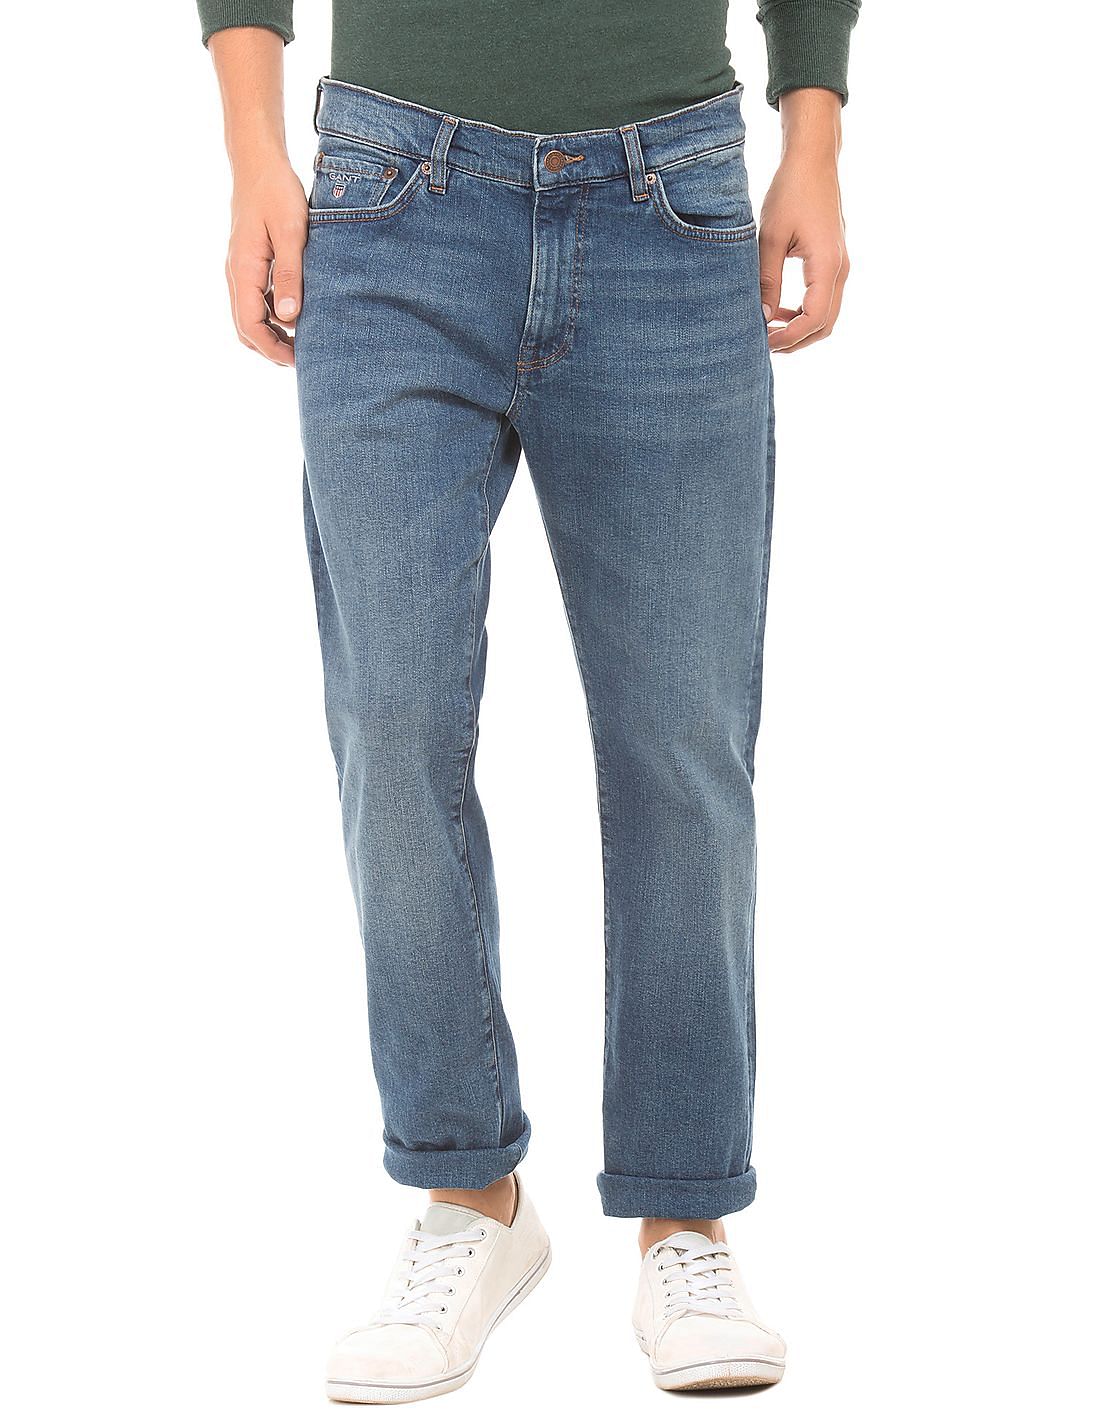 Buy Gant Men Slim Straight Fit Washed Jeans - NNNOW.com